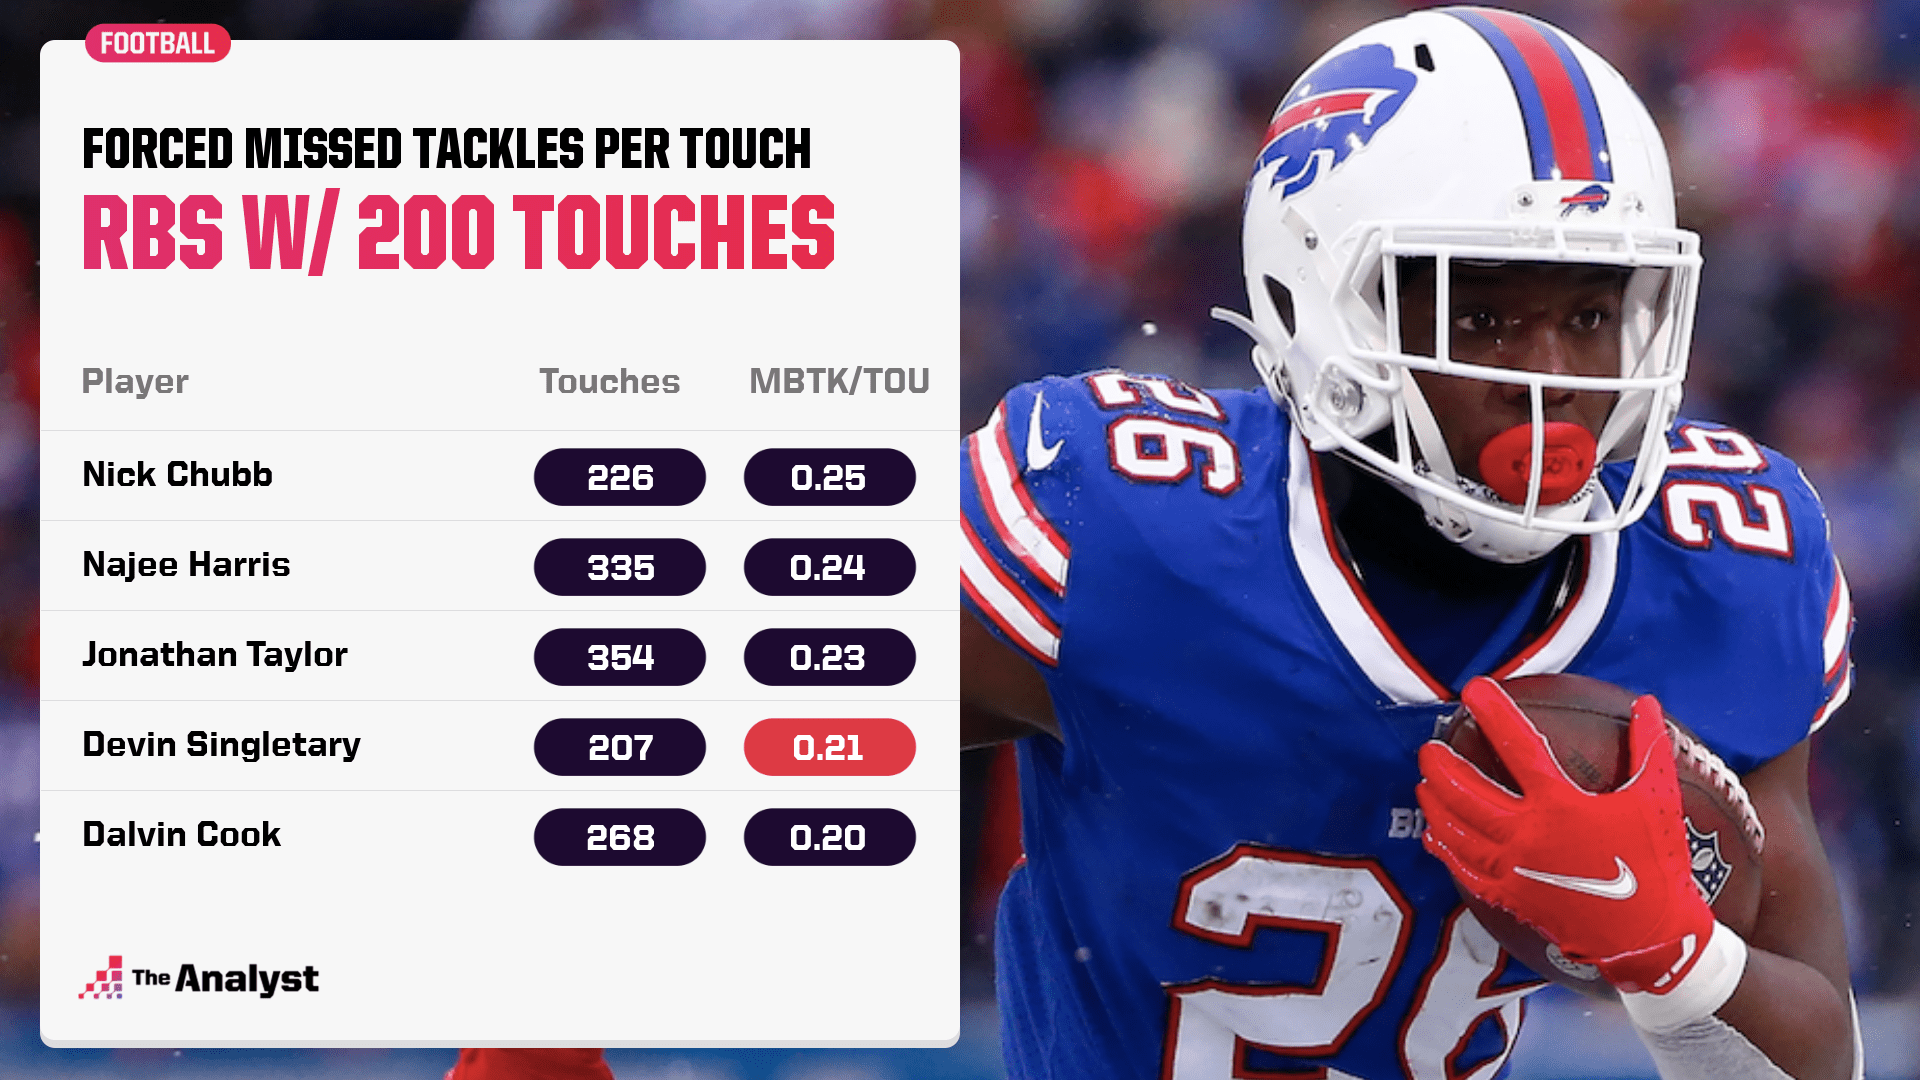 Forced missed tackles per touch